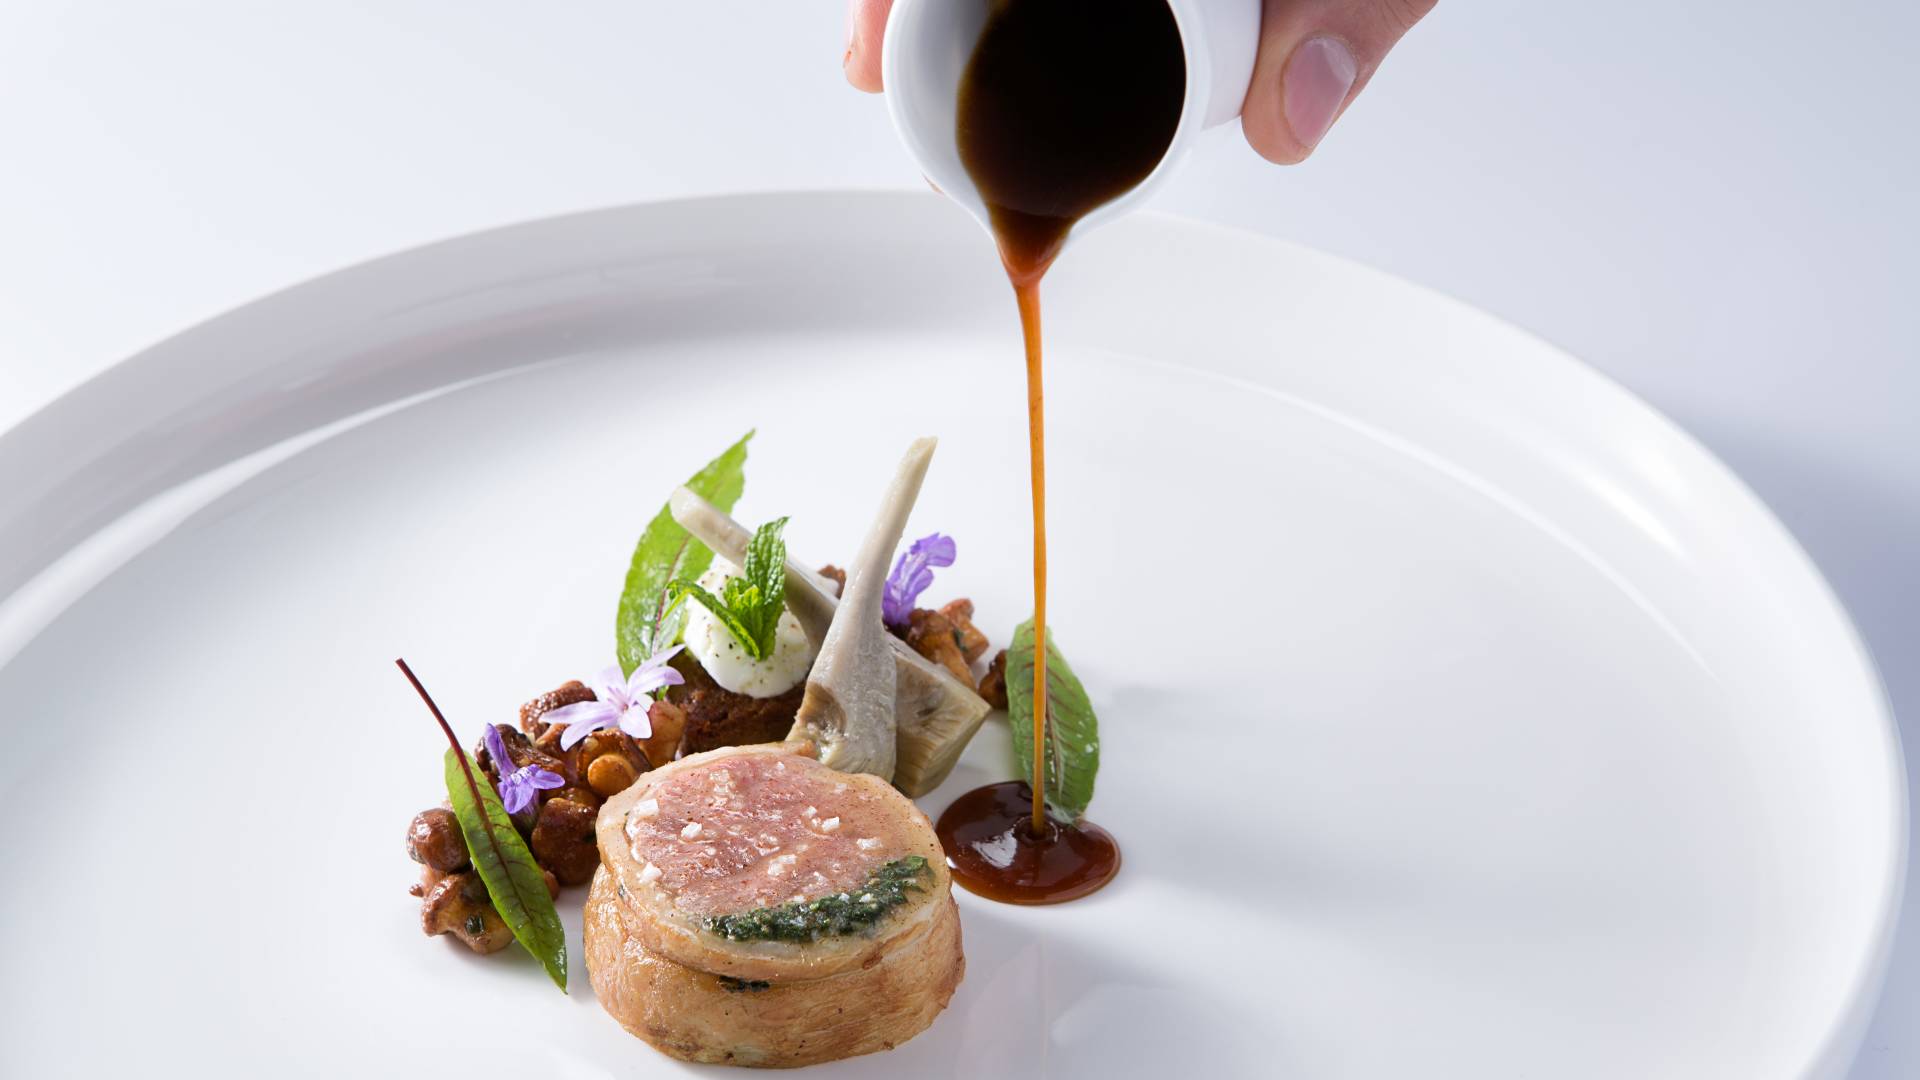 Plate of food with hand pouring sauce-transition